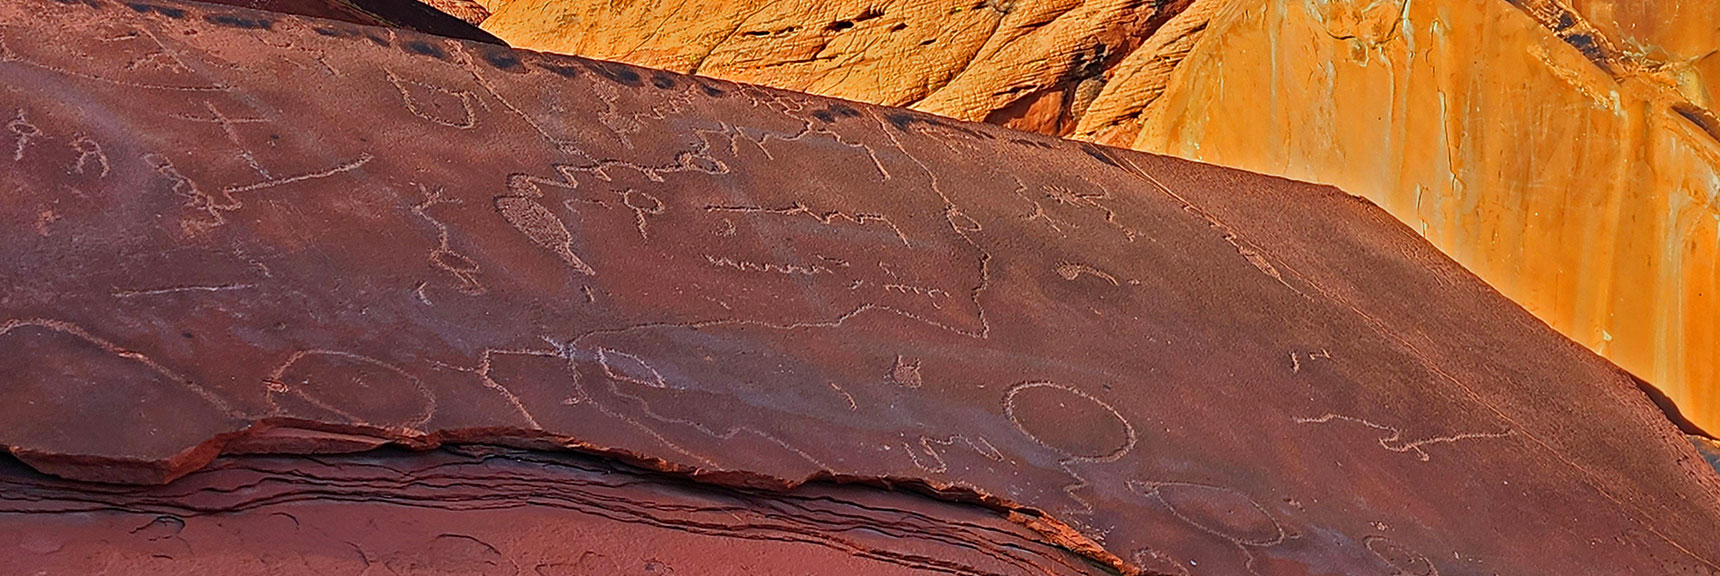 This Artist Was into Circle Shapes. | Upper Calico Hills Loop | Calico Basin and Red Rock Canyon, Nevada